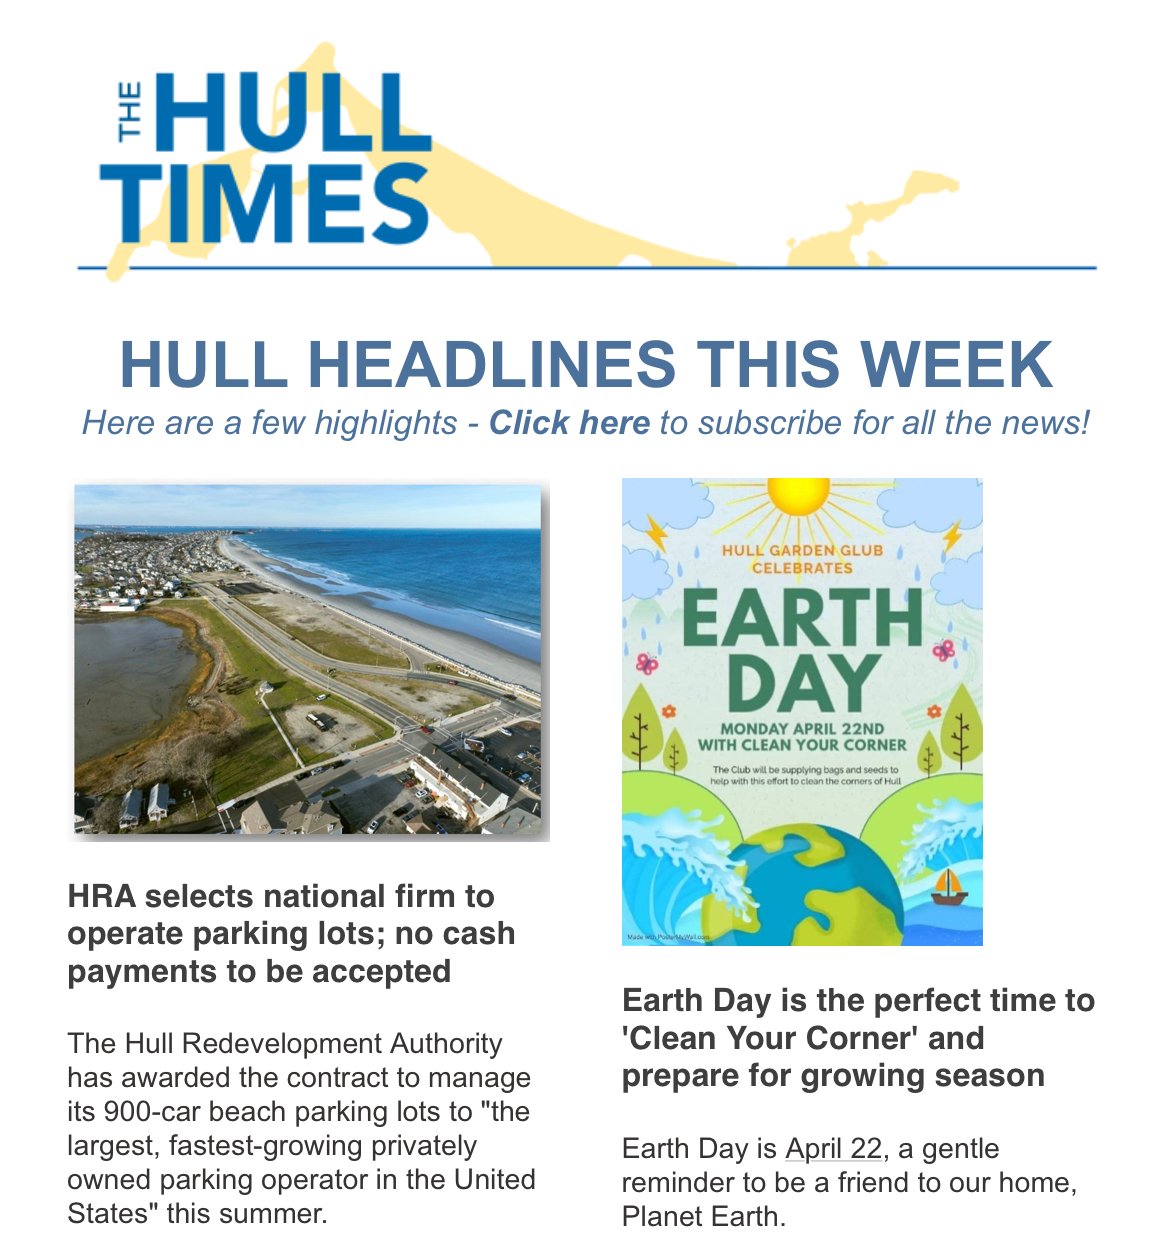 Need a quick read to stay in the know? Our FREE newsletter is packed with local news and links to details and data. Click this link to sign up for The Hull Times newsletter -- you can also get news from our sister publication, the South Shore Senior 